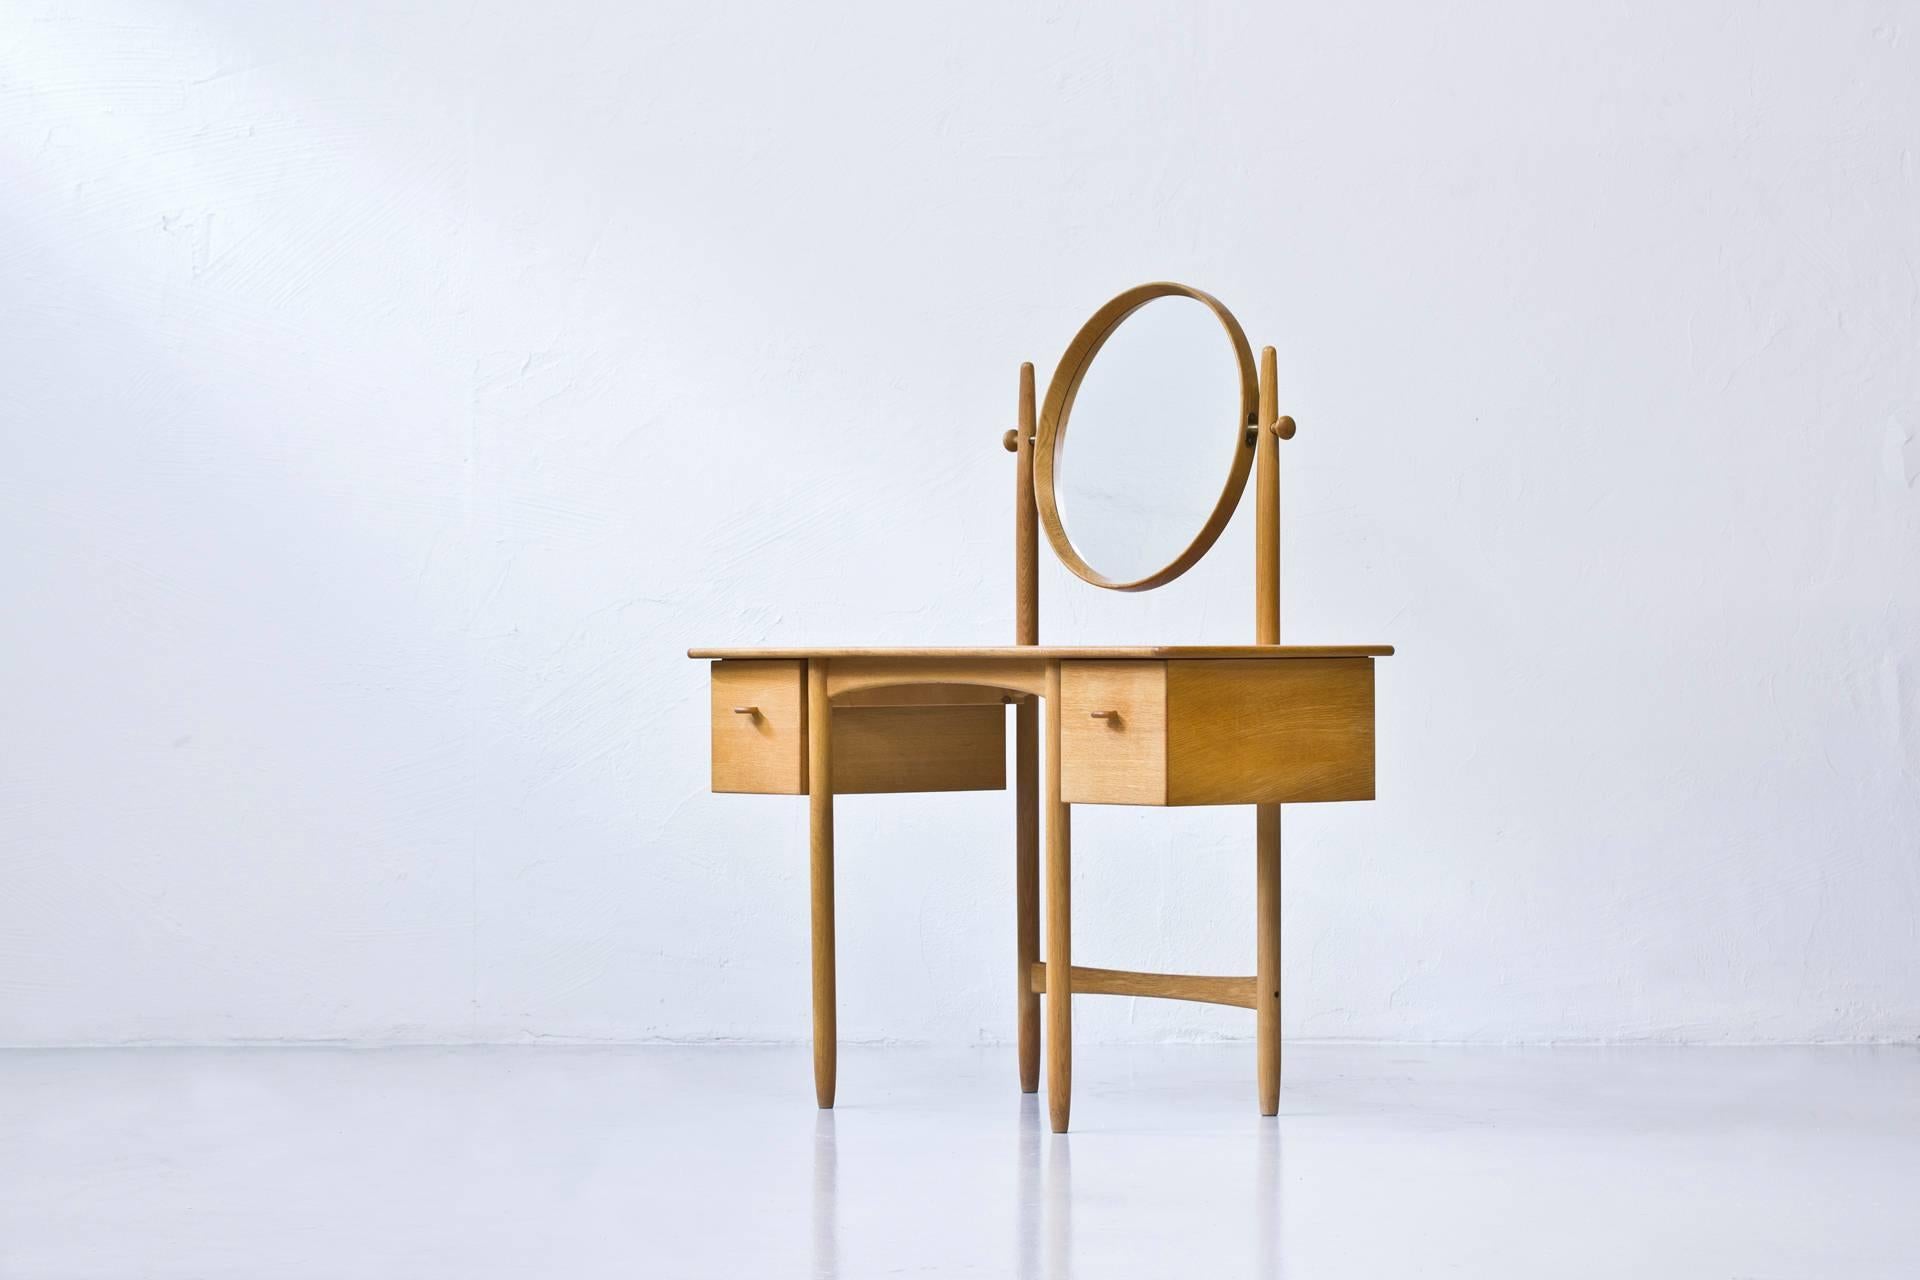 Rare dressing table designed in Sweden by Sven Engstrom & Gunnar Myrstrand. Produced by Bodafors in 1964. Solid oak base, drawers and mirror with oak table top and brass details. Original red lacquered tray on the inside of one of the drawers. Very